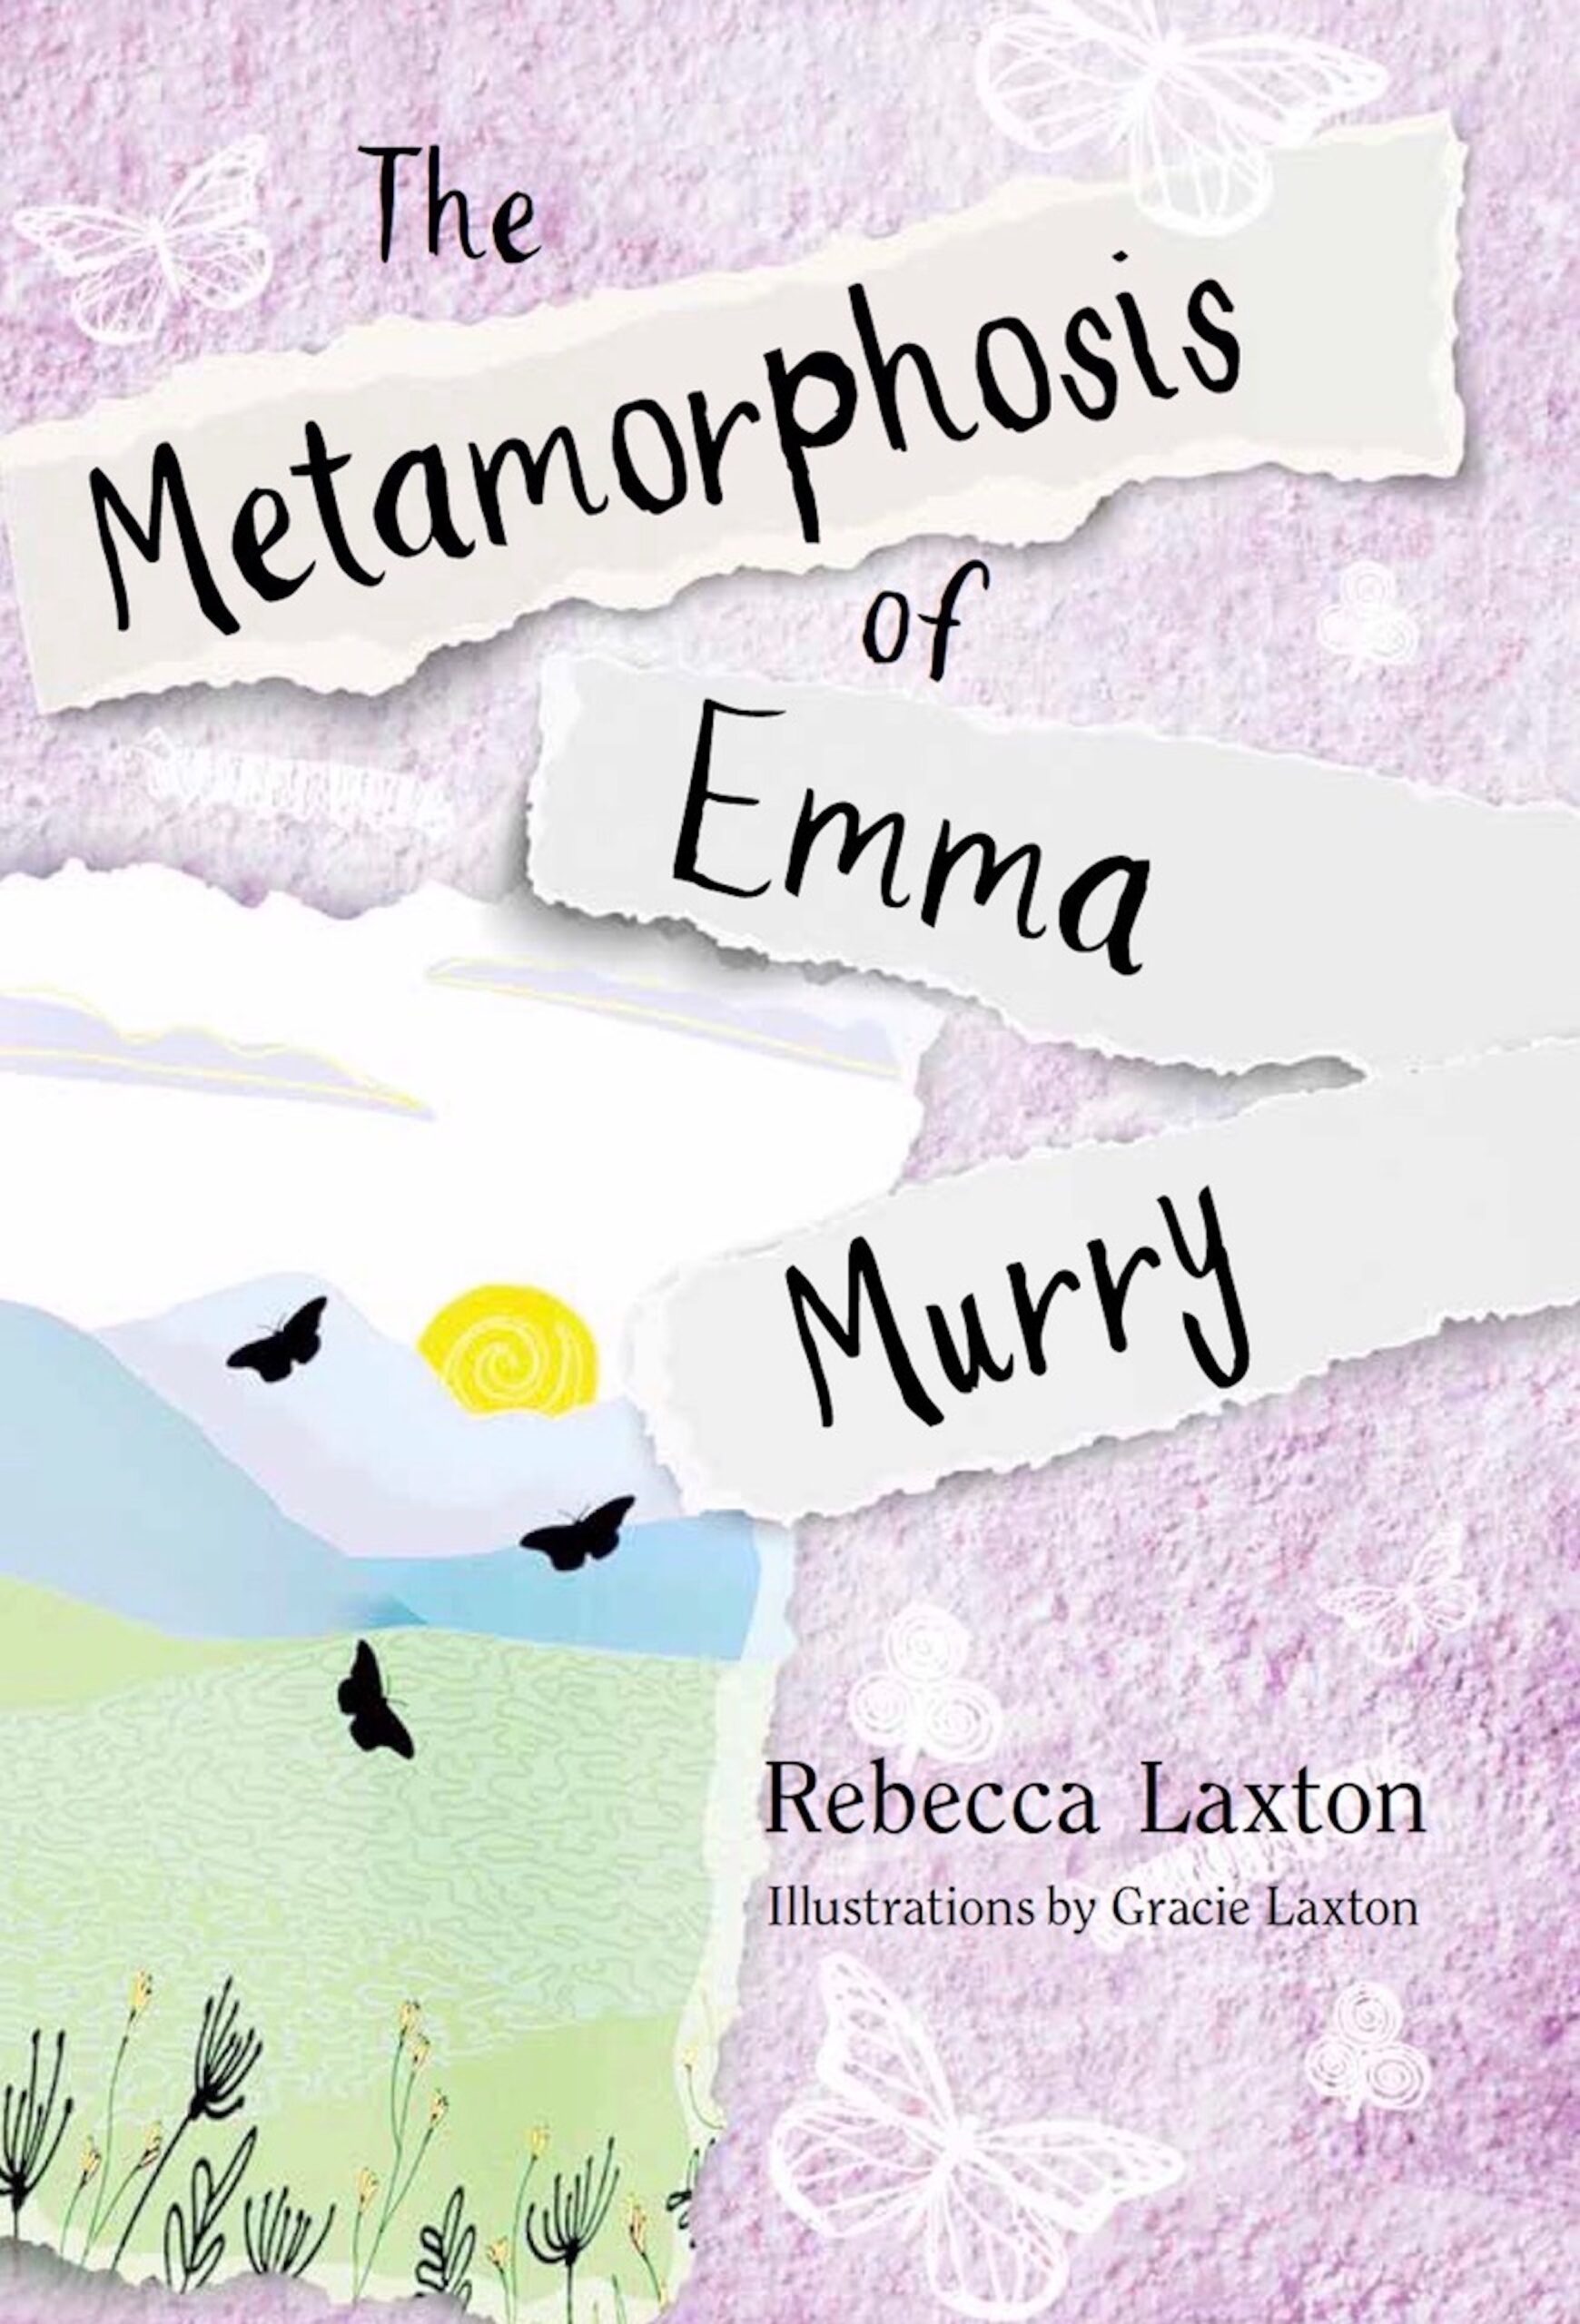 The Metamorphosis of Emma Murry by Rebecca Laxton